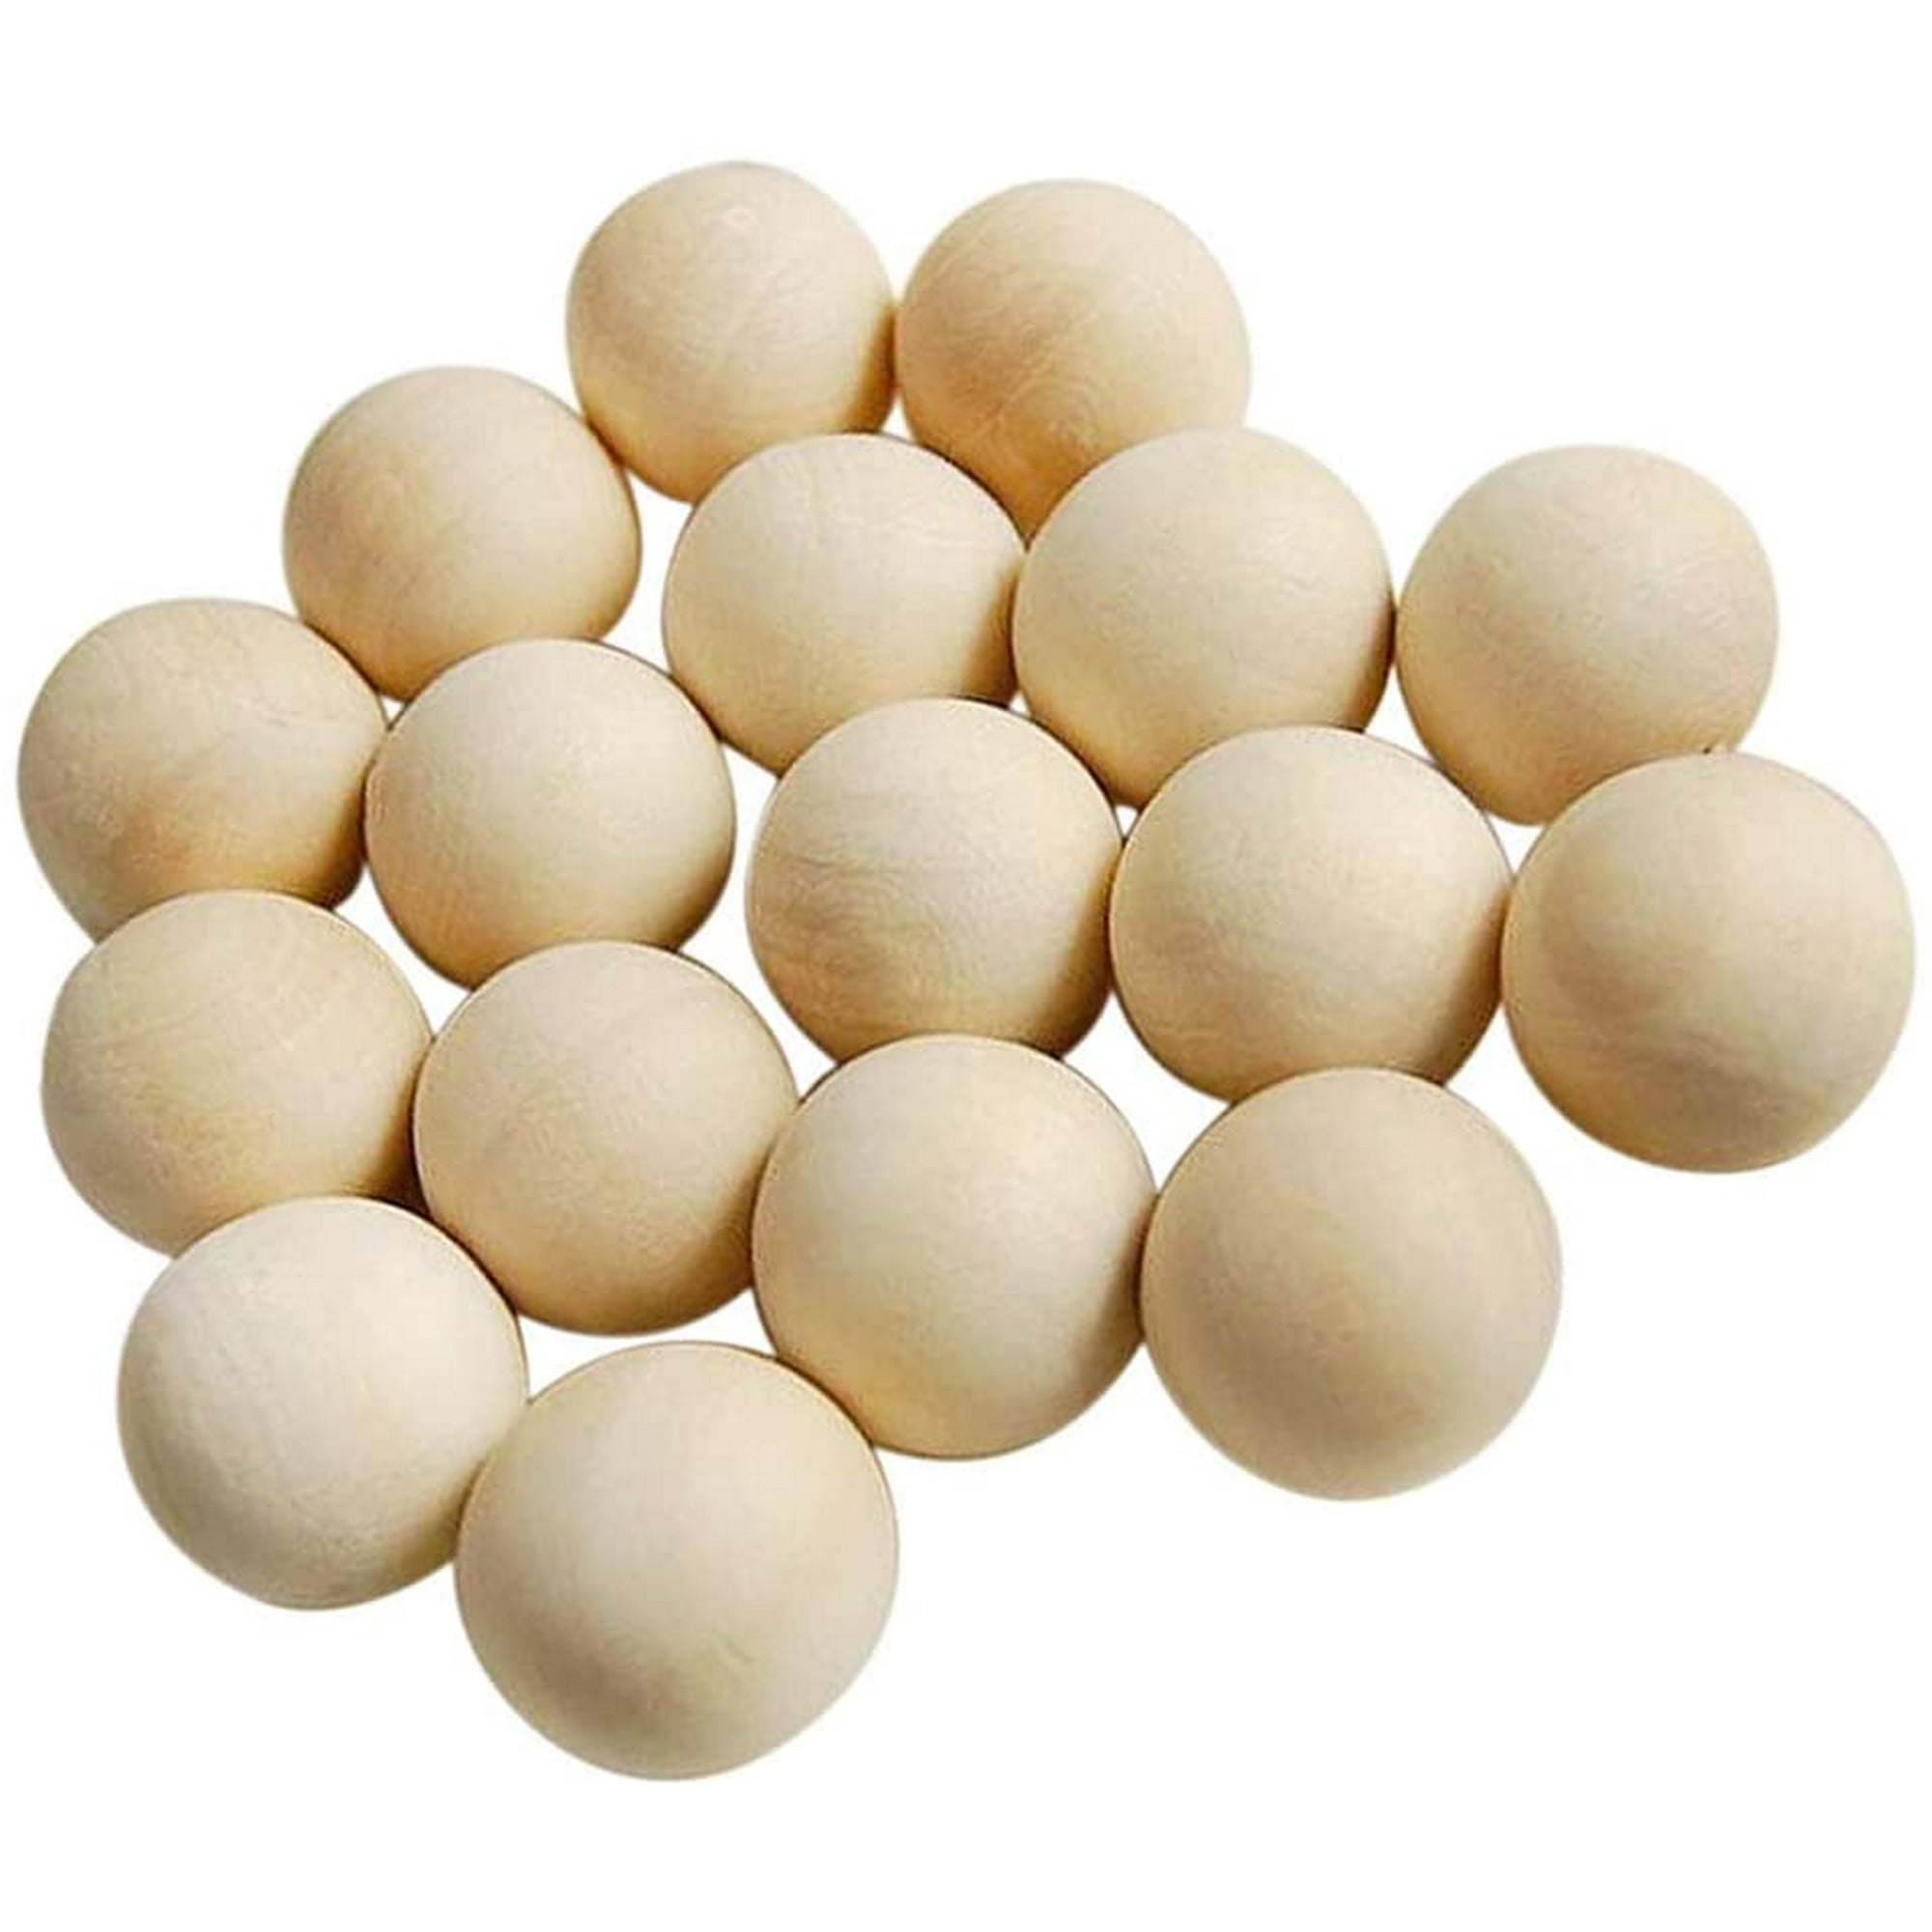 100PCS NATURAL WOOD ROUND BALL SPACER BEADS DIY CRAFT JEWELRY DECORATION NICE